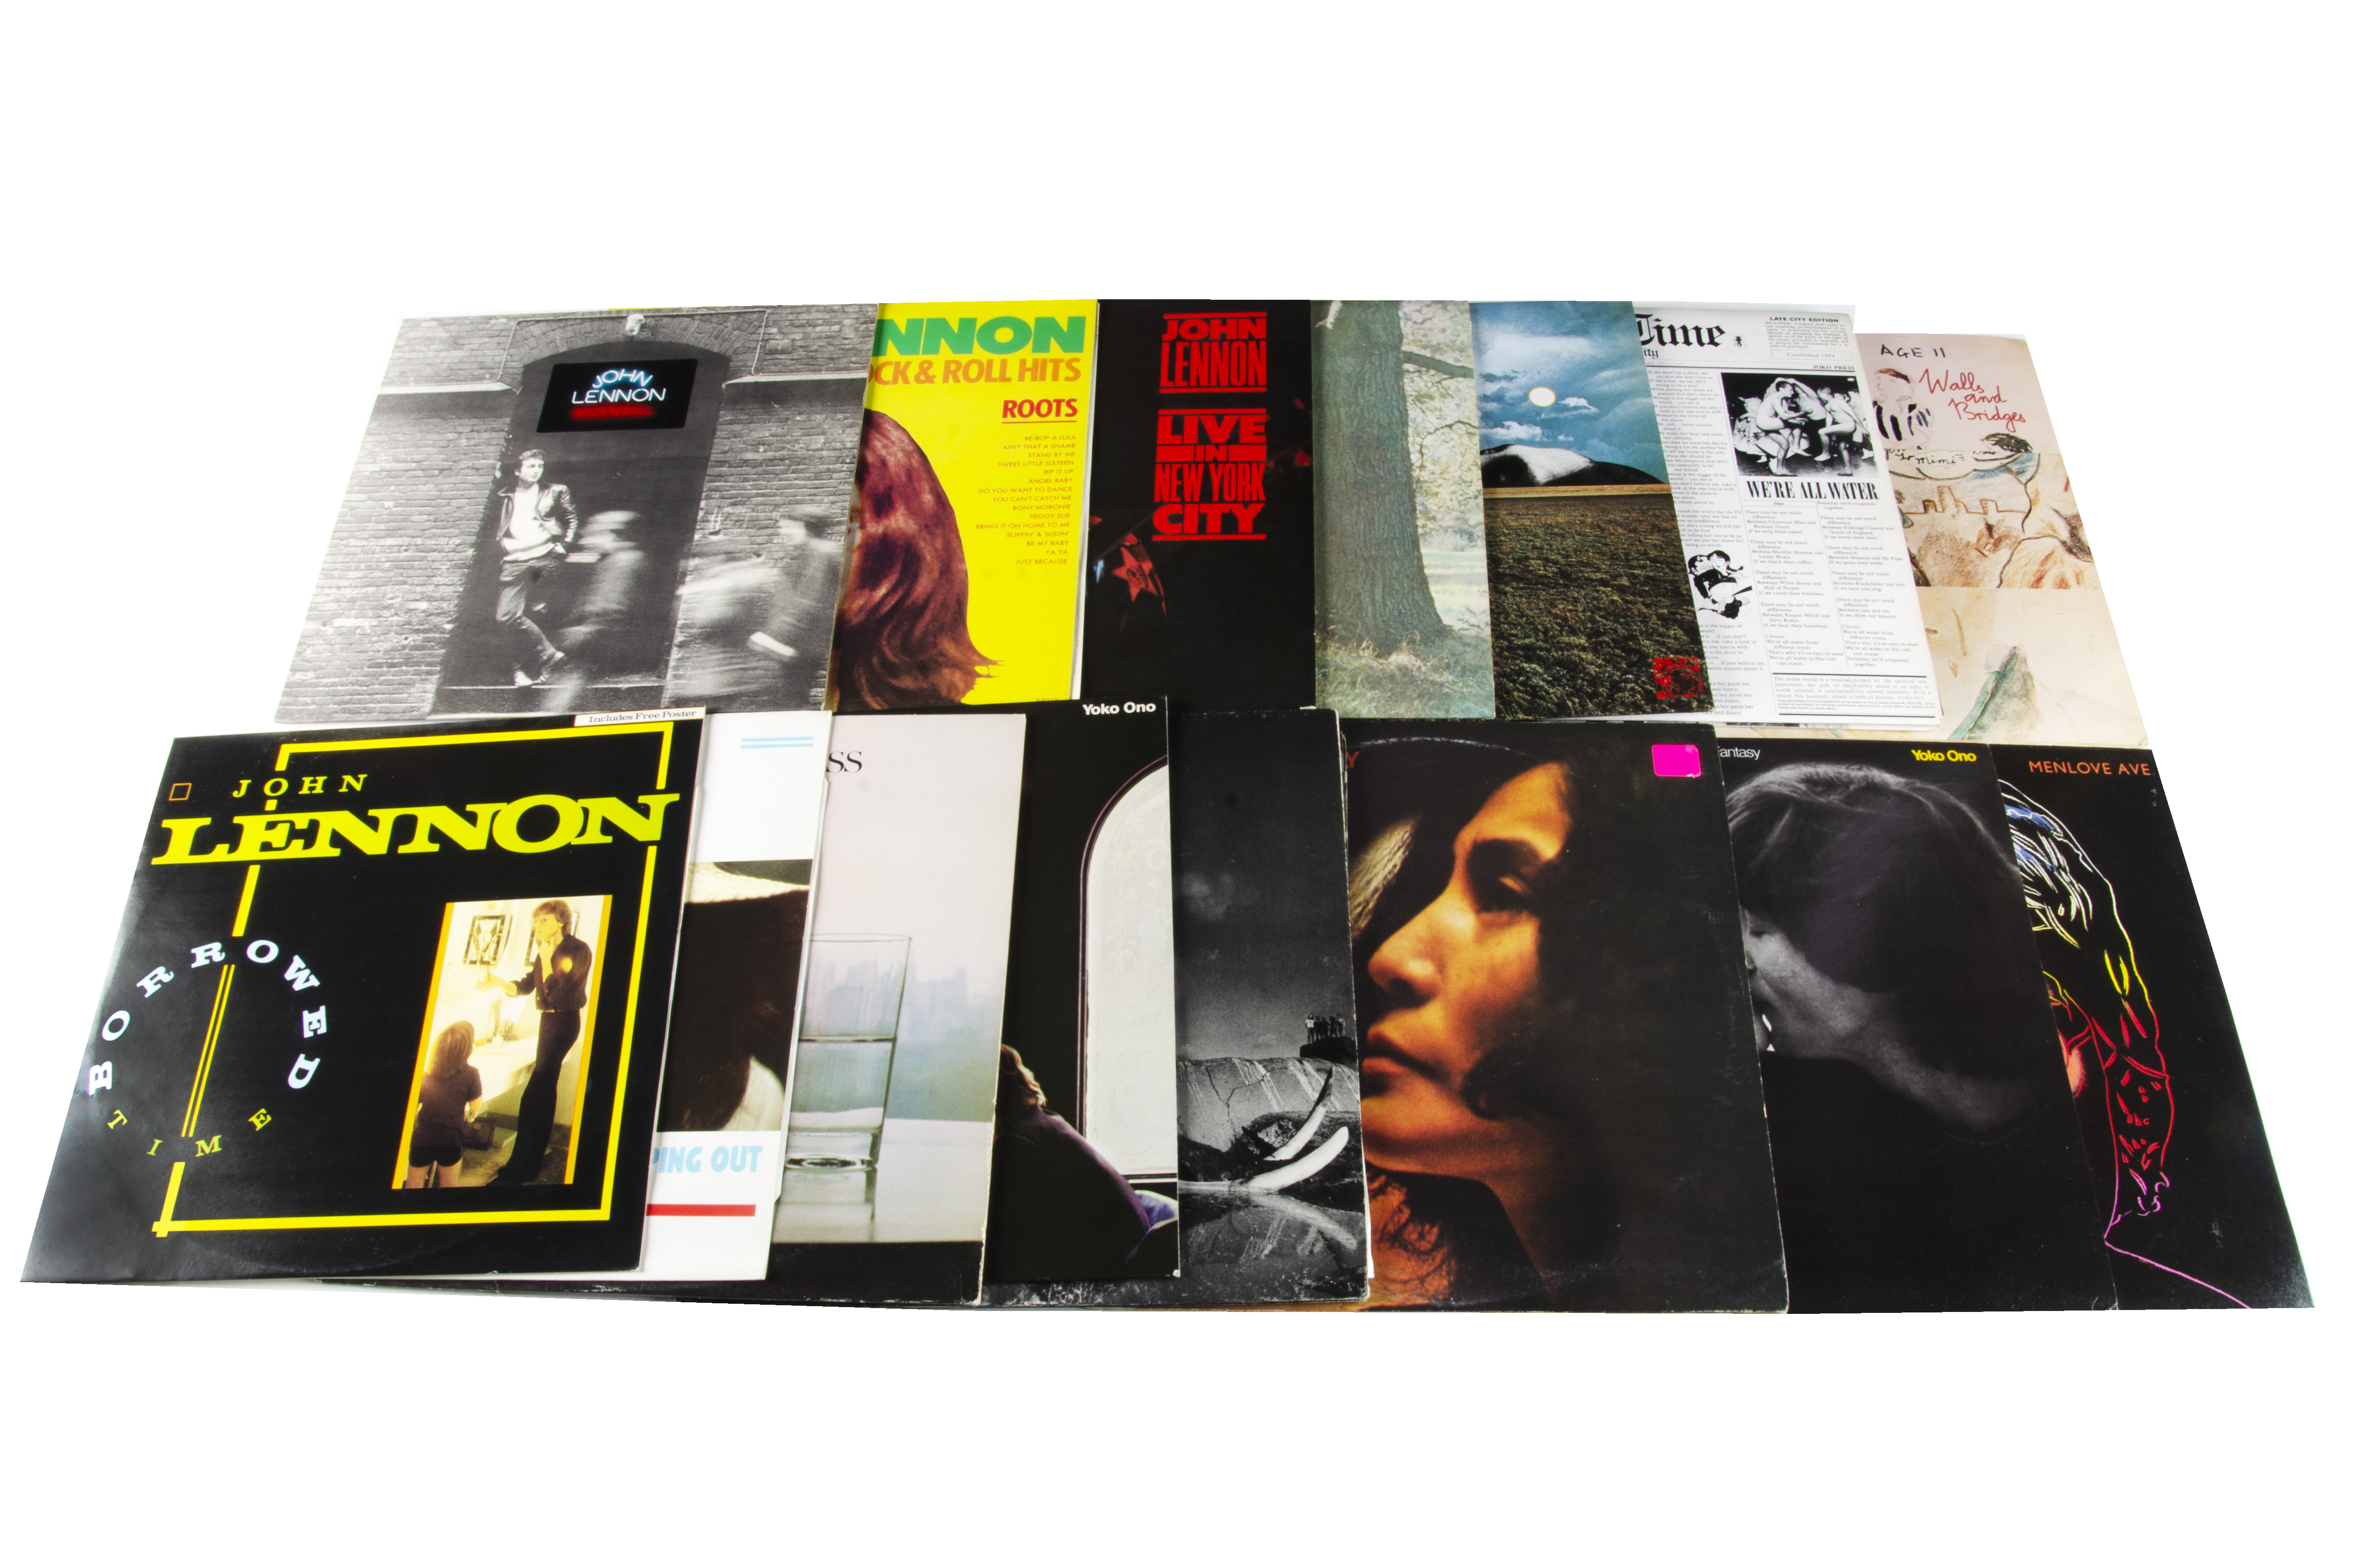 John Lennon / Yoko Ono LPs, thirteen Lennon, Ono and related albums and two 12" singles including